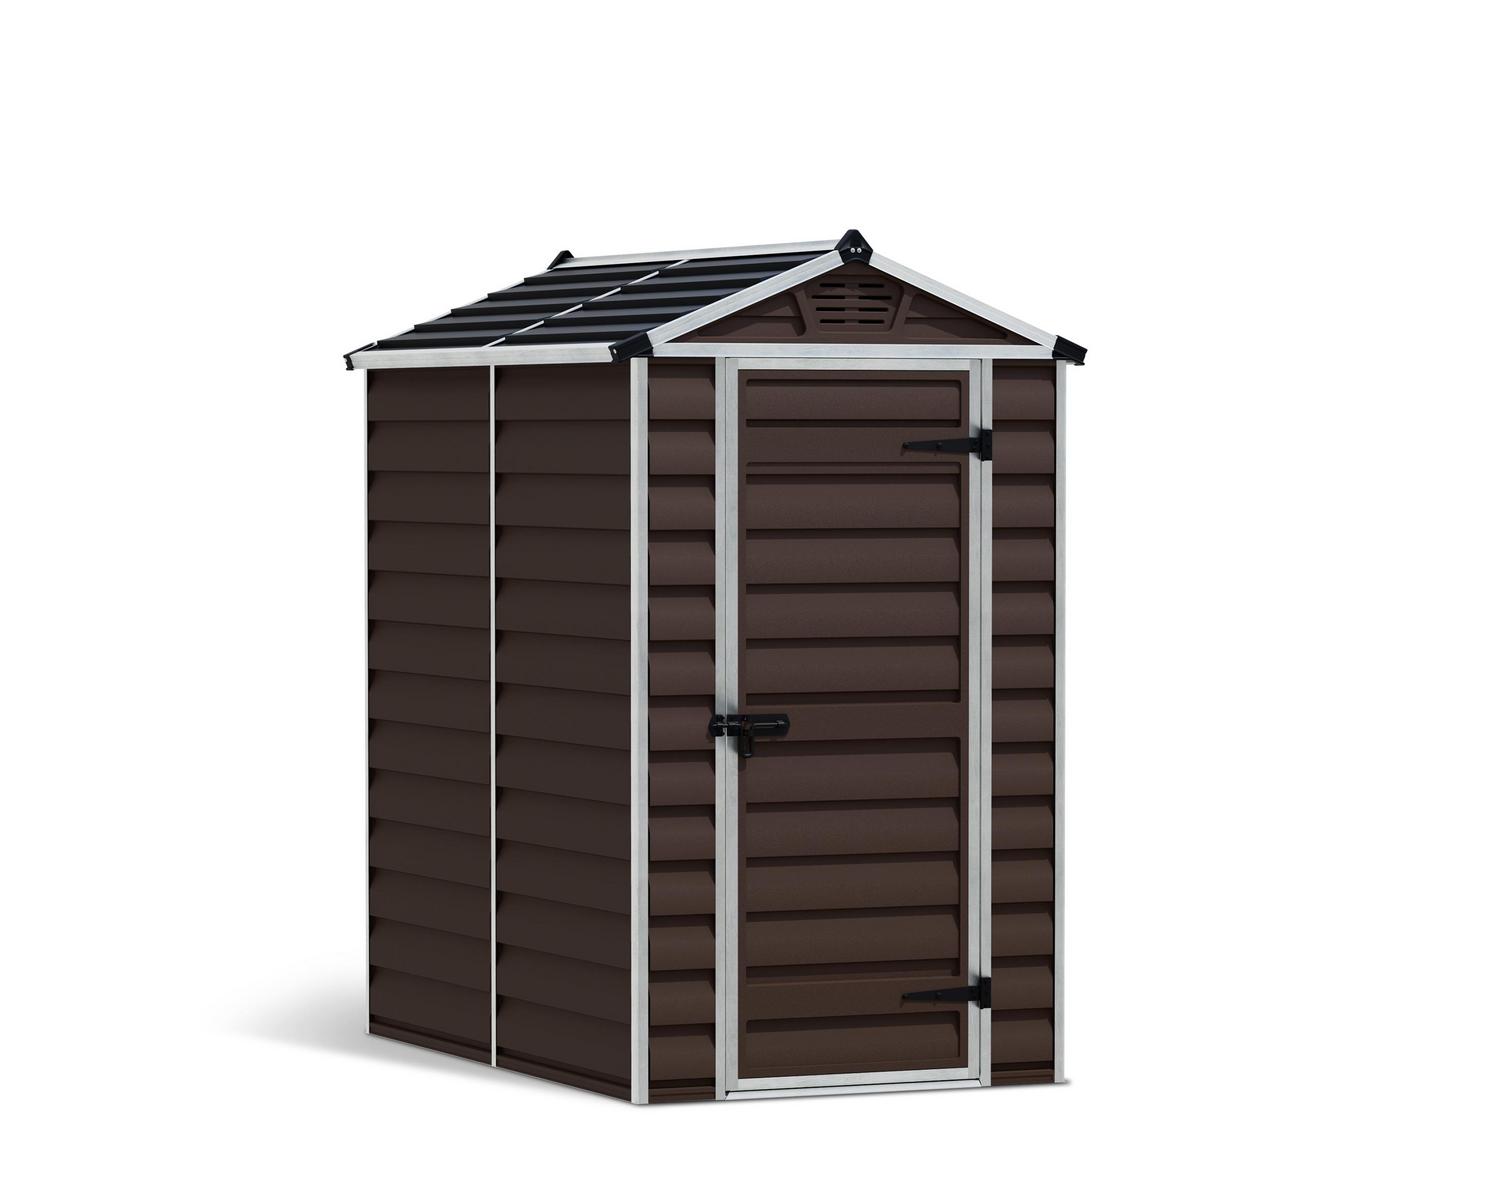 Skylight 4 ft. x 6 ft. Plastic Garden Storage Shed with Brown Polycarbonate Walls & Aluminium Frame